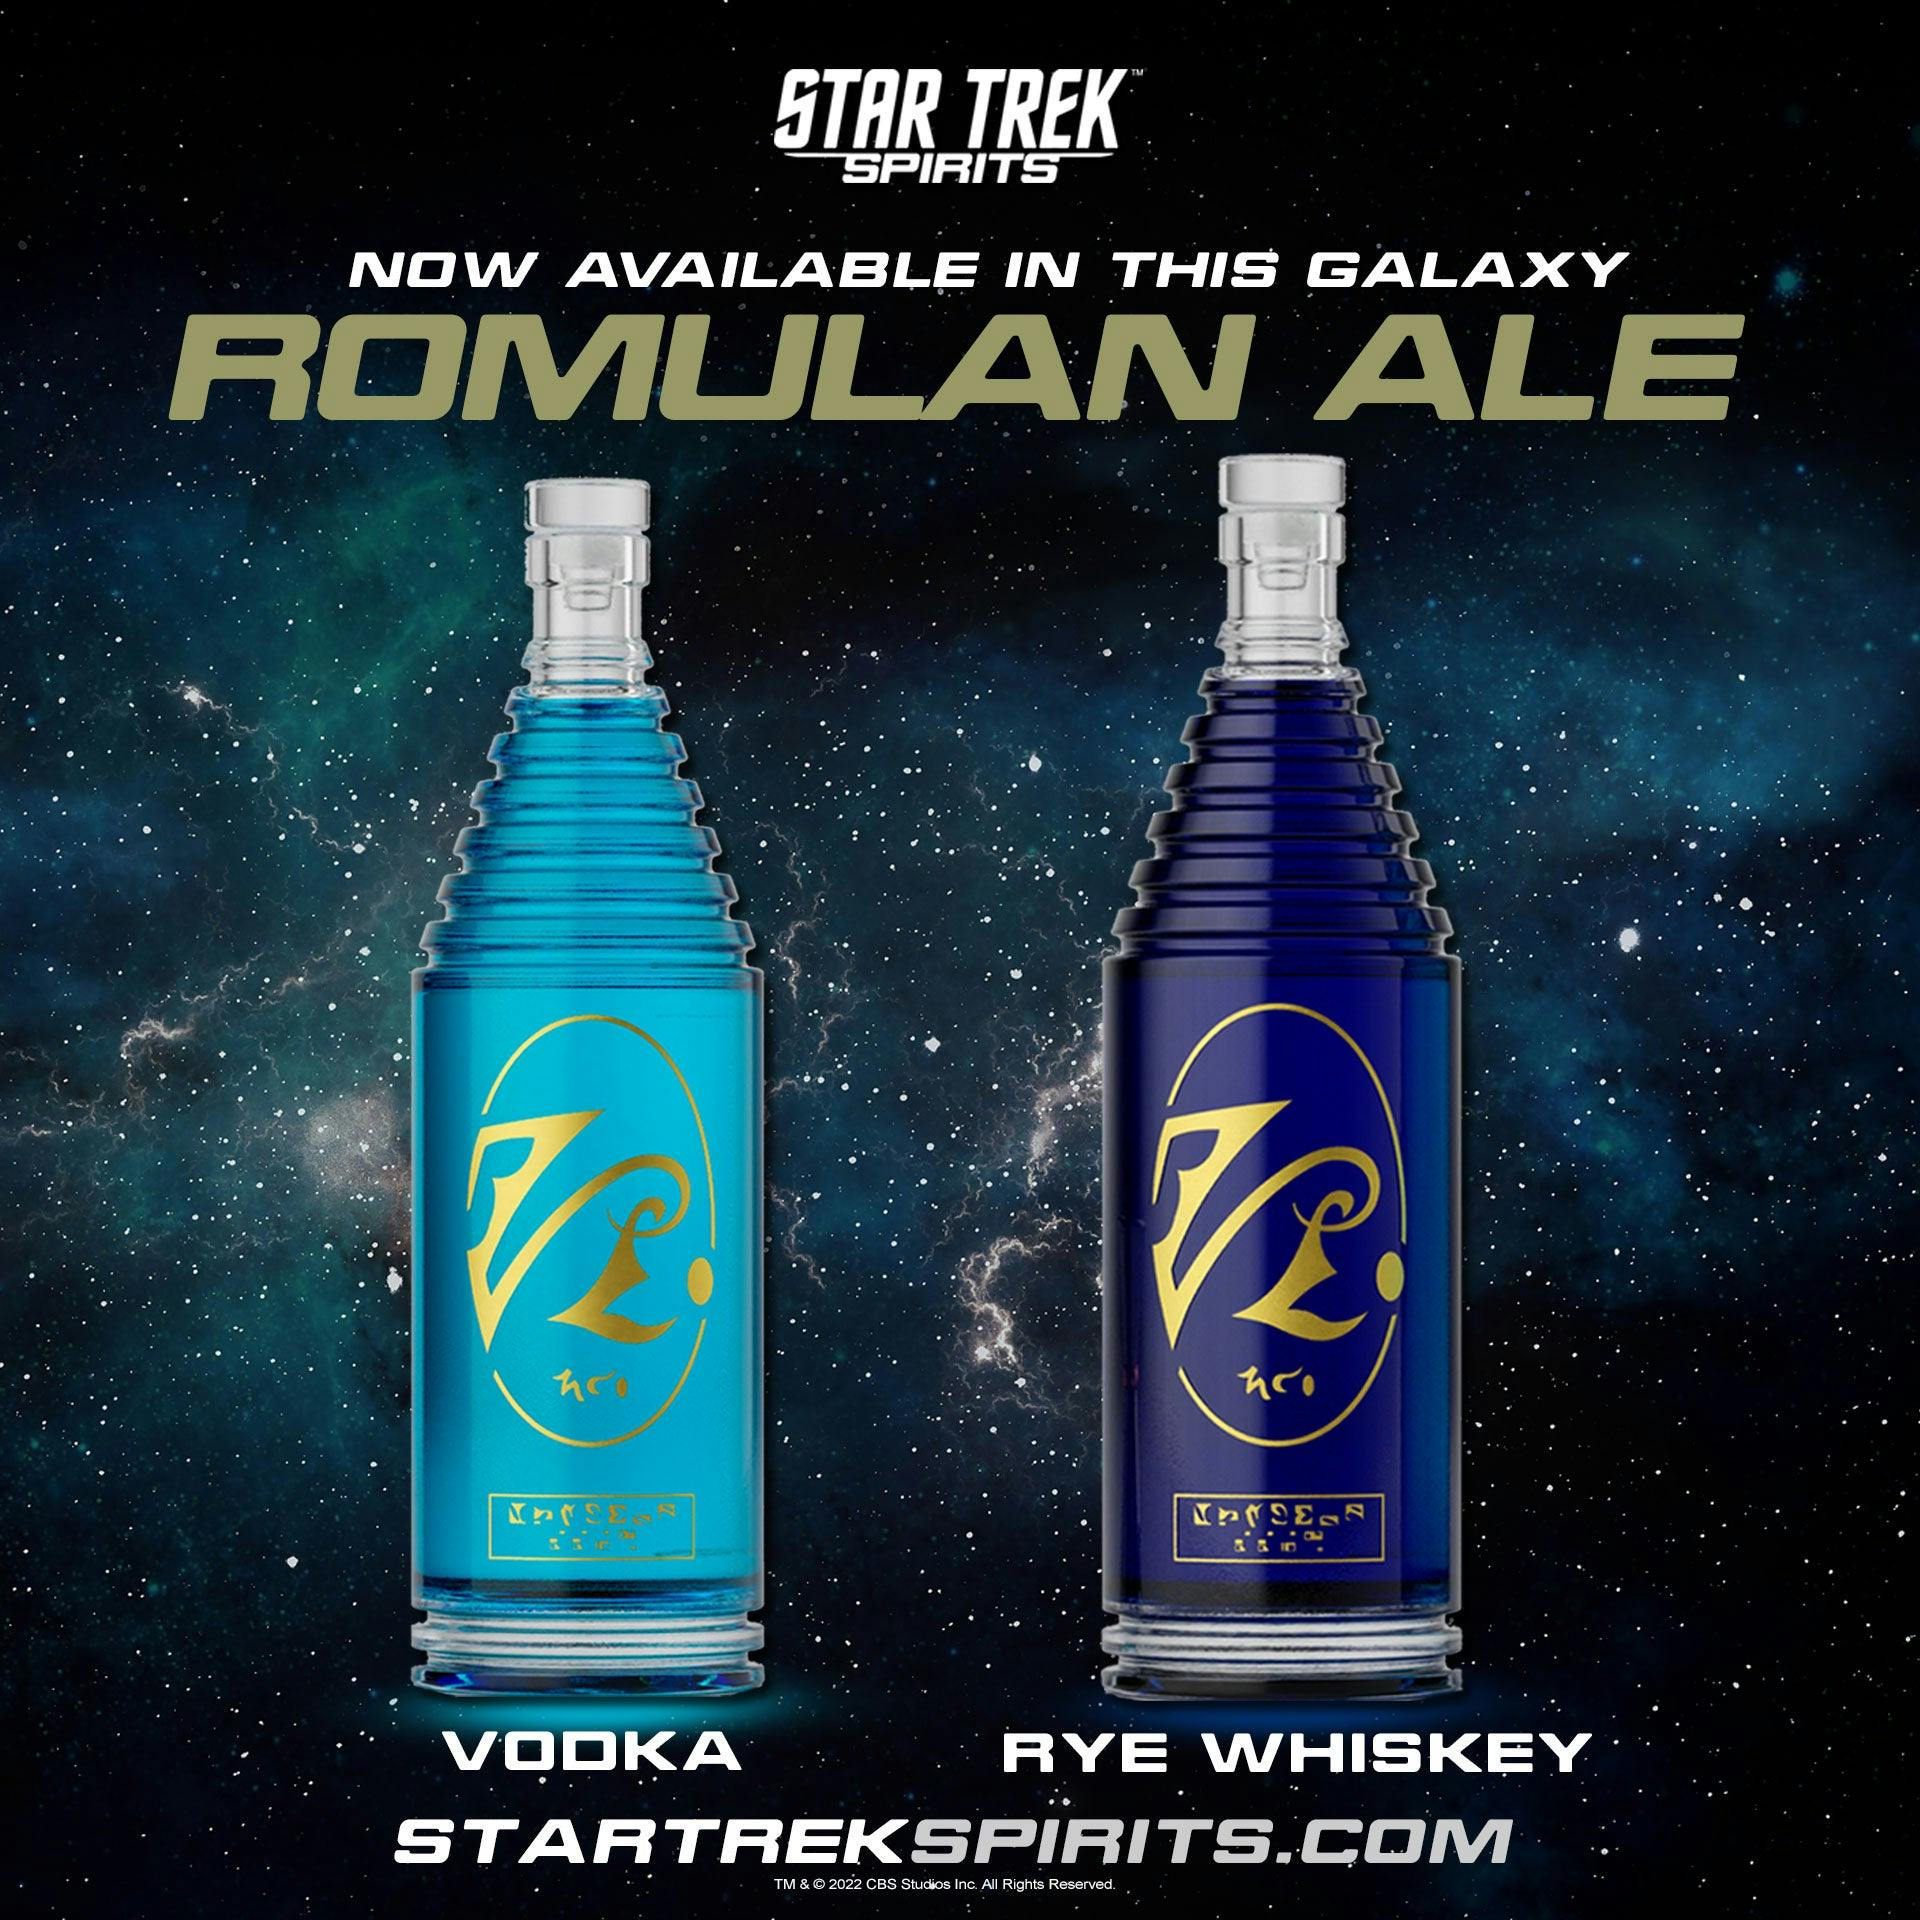 Wines That Rock's Romulan Ale - Vodka and Rye Whiskey bottles